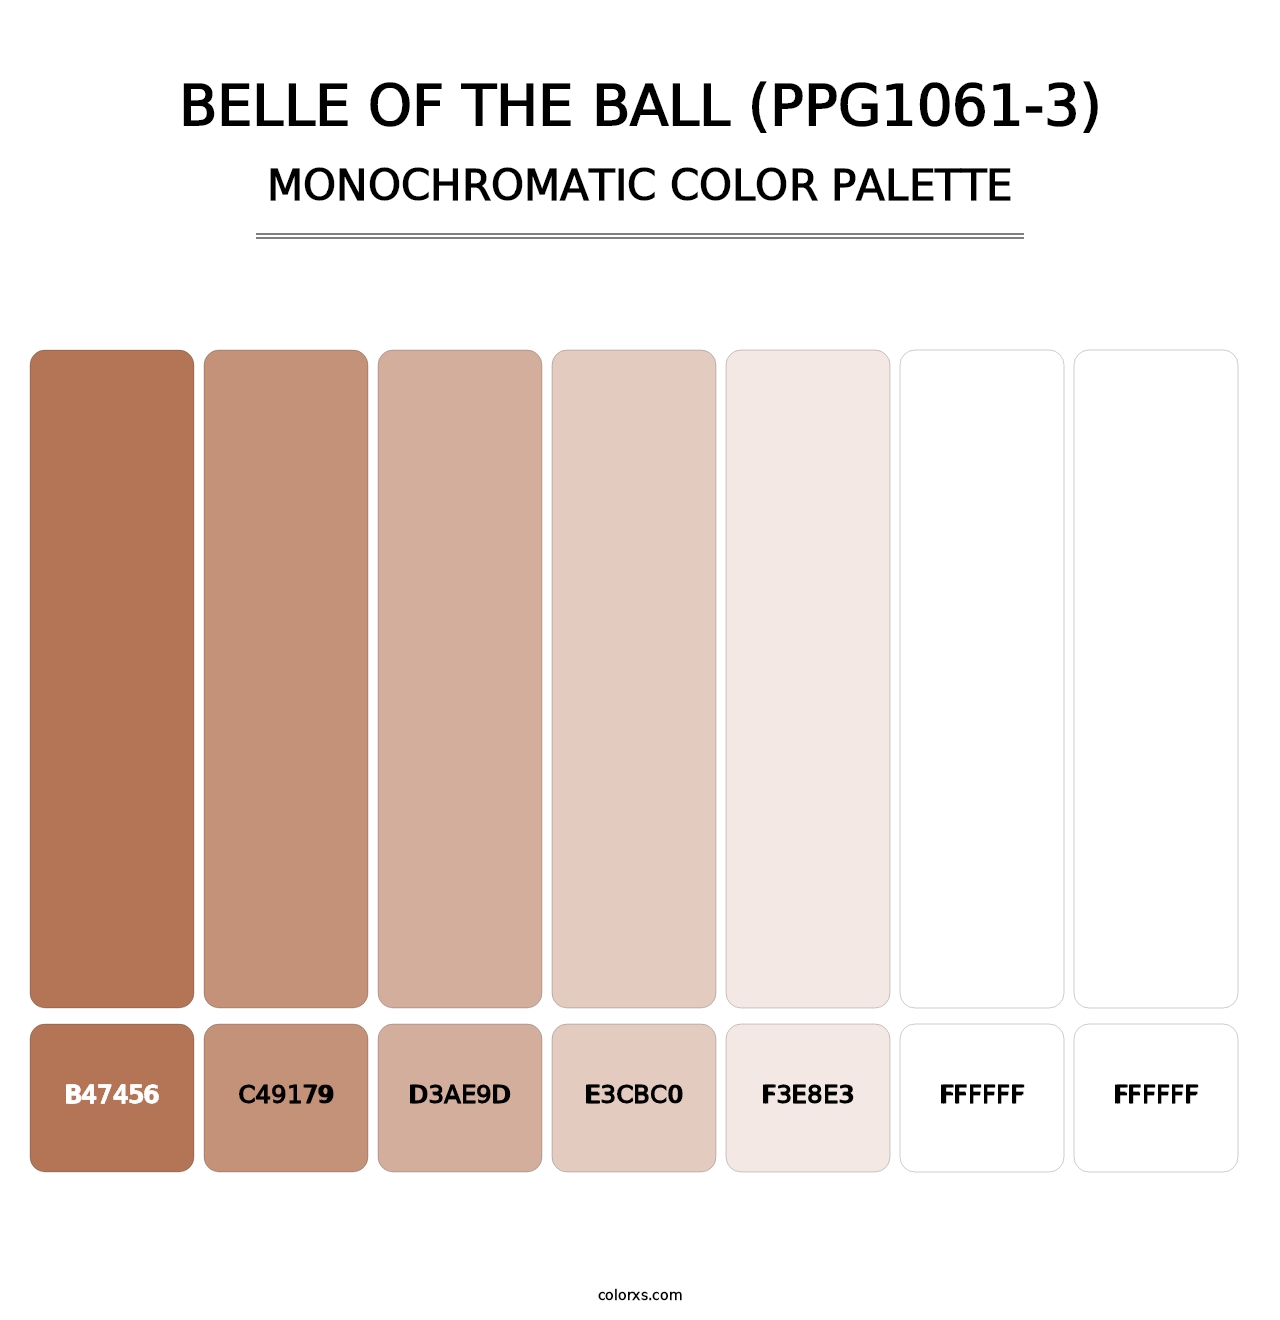 Belle Of The Ball (PPG1061-3) - Monochromatic Color Palette